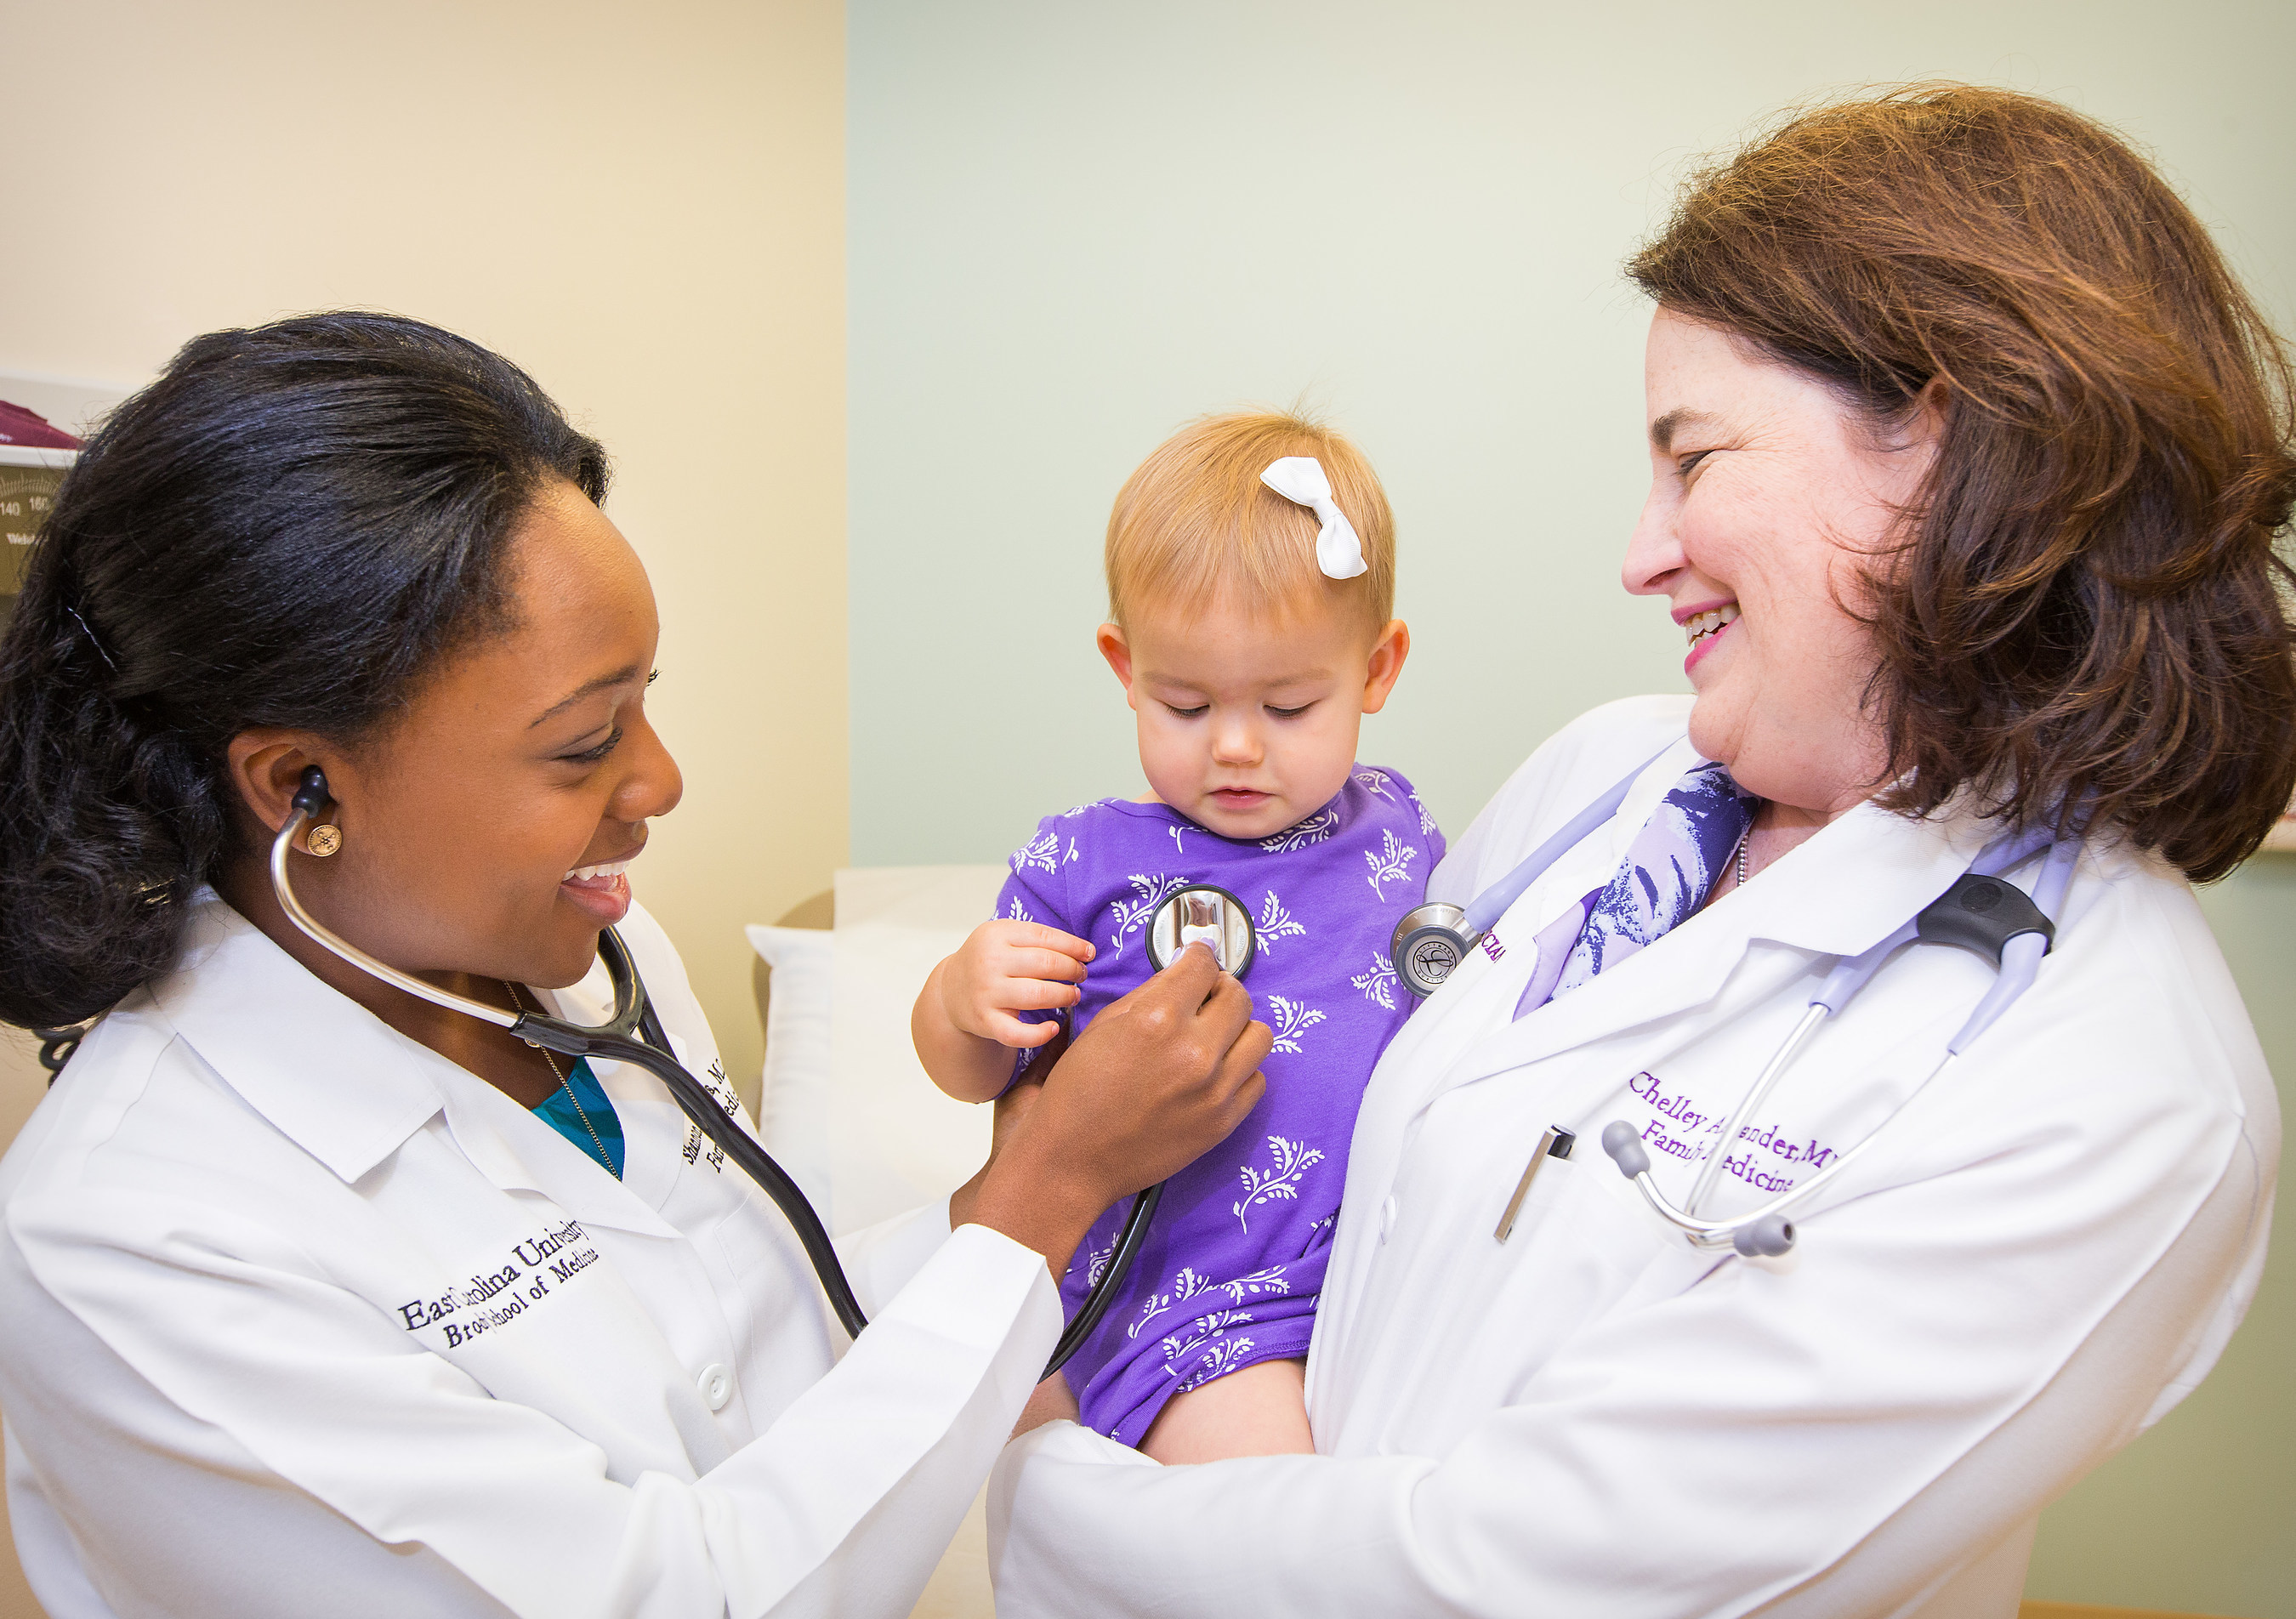 ECU's Brody School of Medicine is the Only Medical School in North Carolina  and the Southeast to be Ranked Tops in Producing Vital Family Physicians